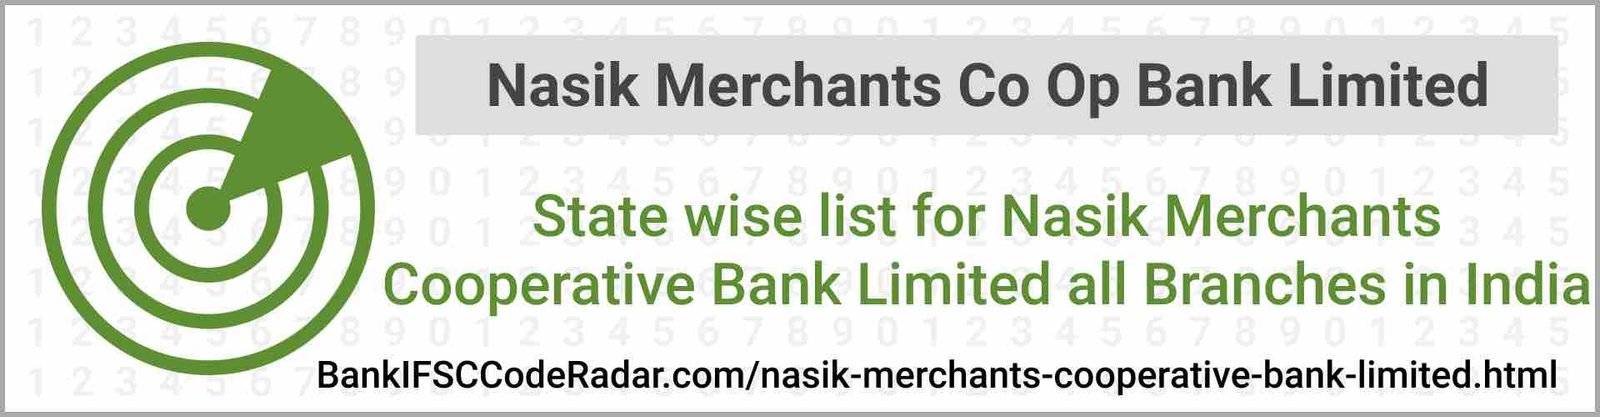 Nasik Merchants Cooperative Bank Limited All Branches India